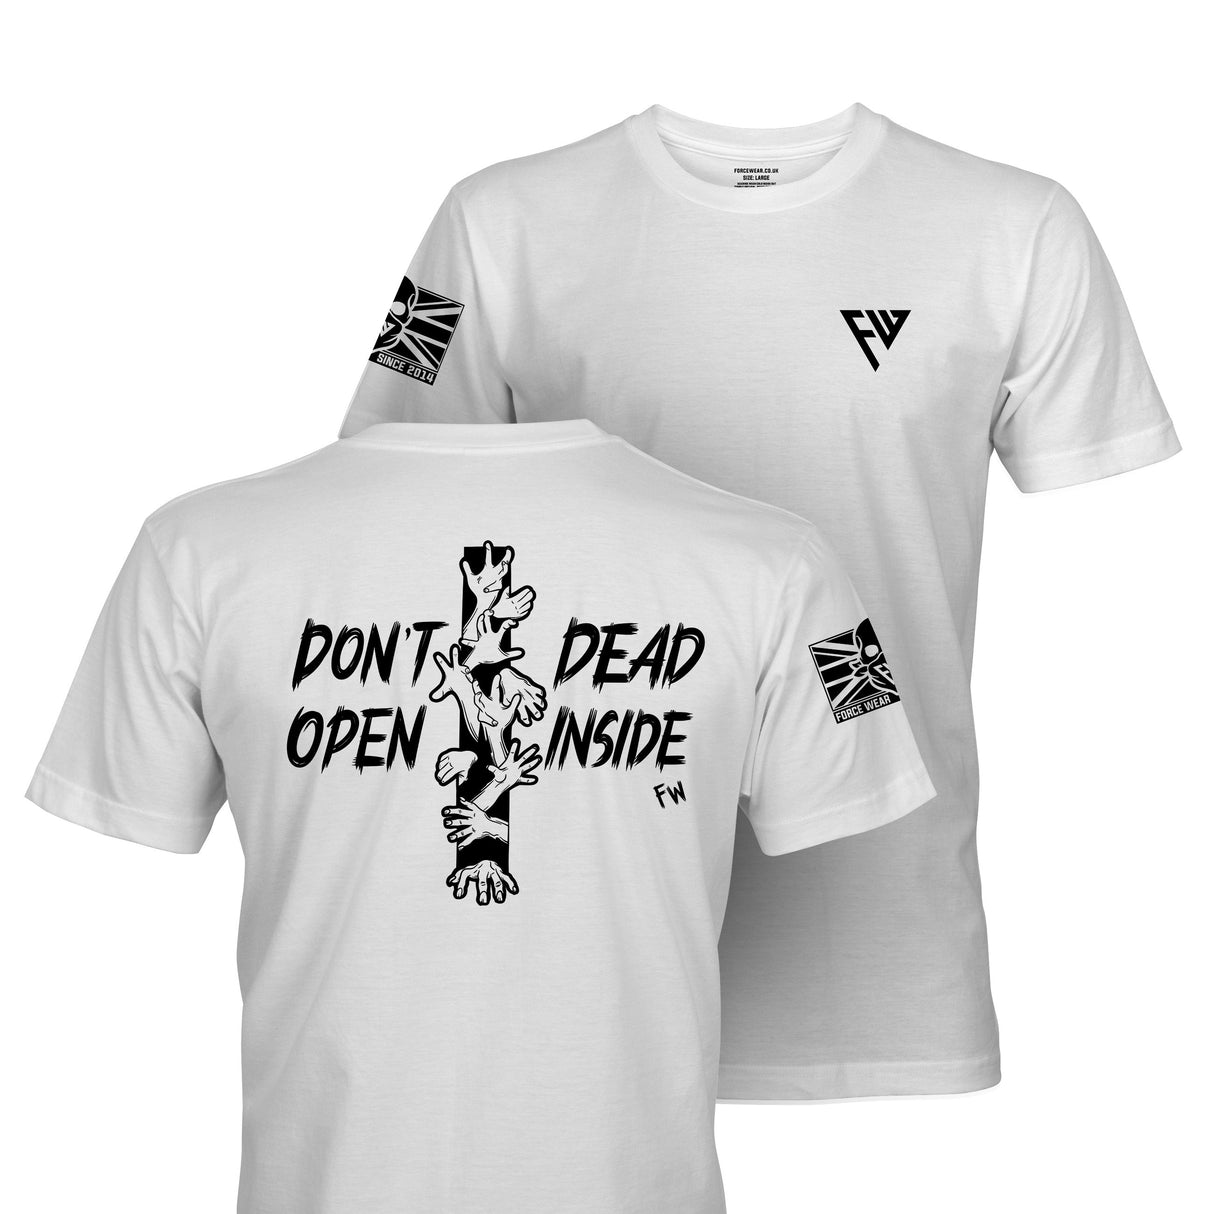 DON'T OPEN - Force Wear HQ - T-SHIRTS